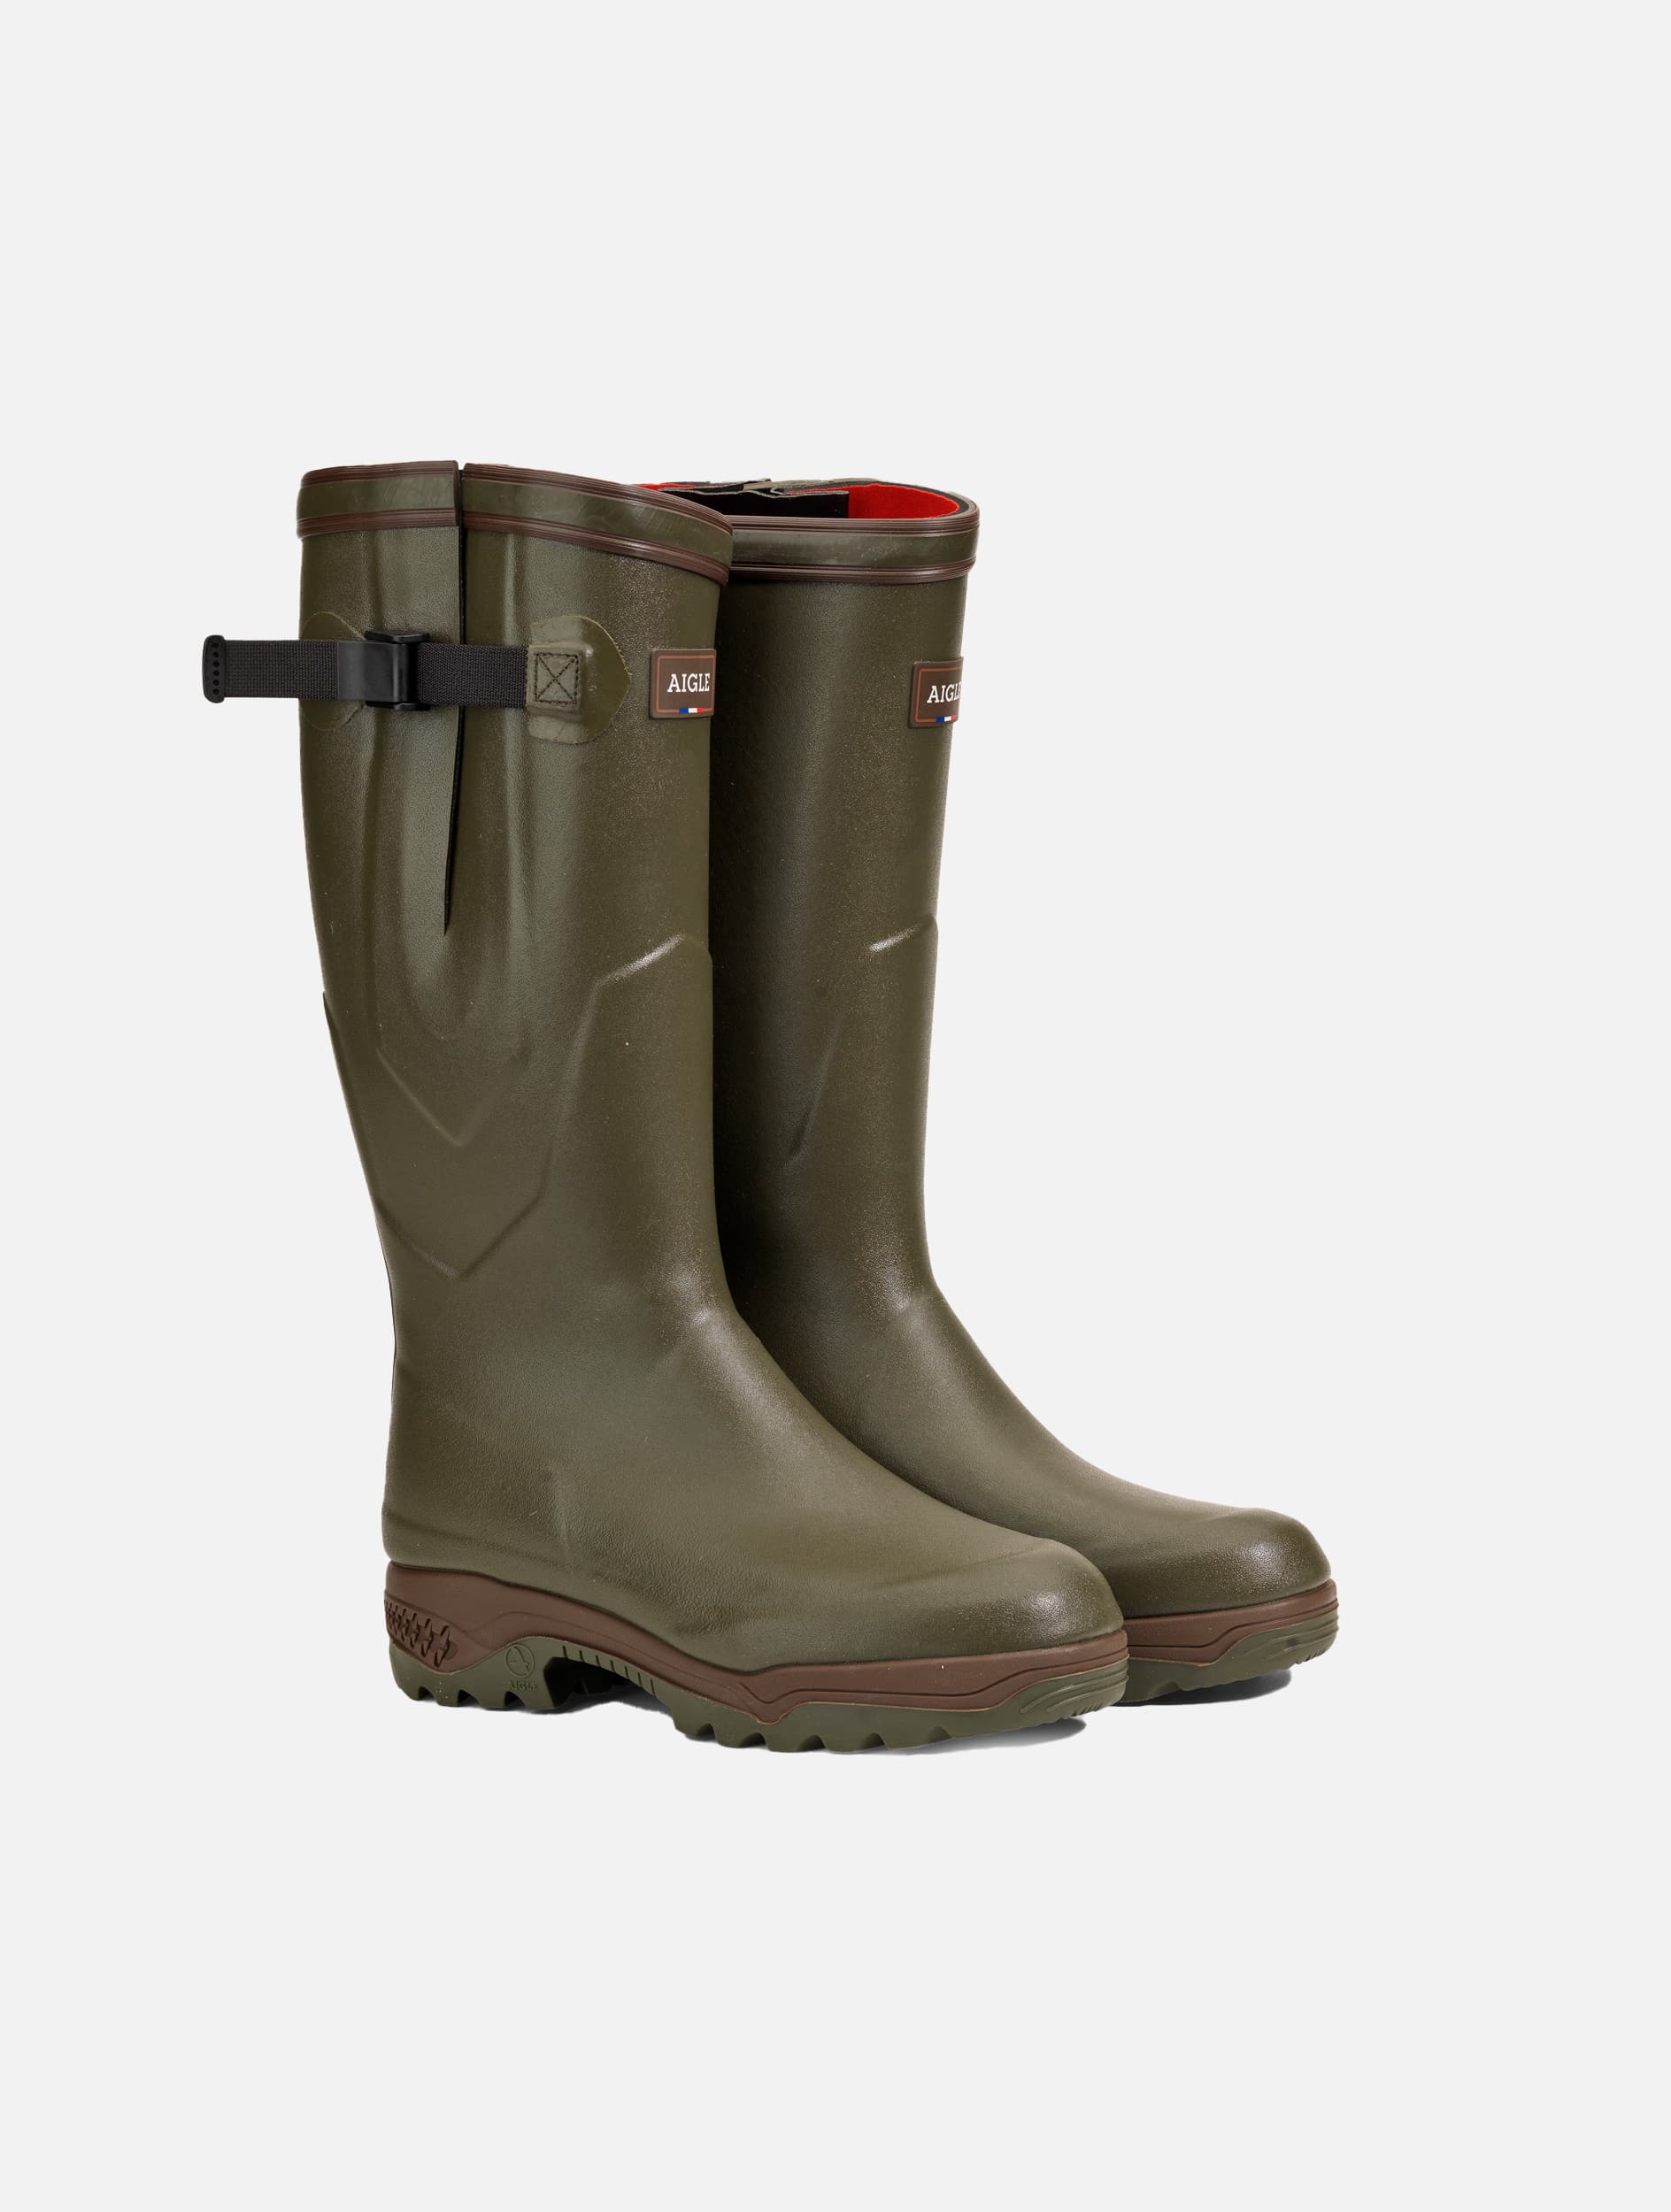 Aigle Parcours 2 Iso Neoprene Lined Wellington Boots | Country Ways